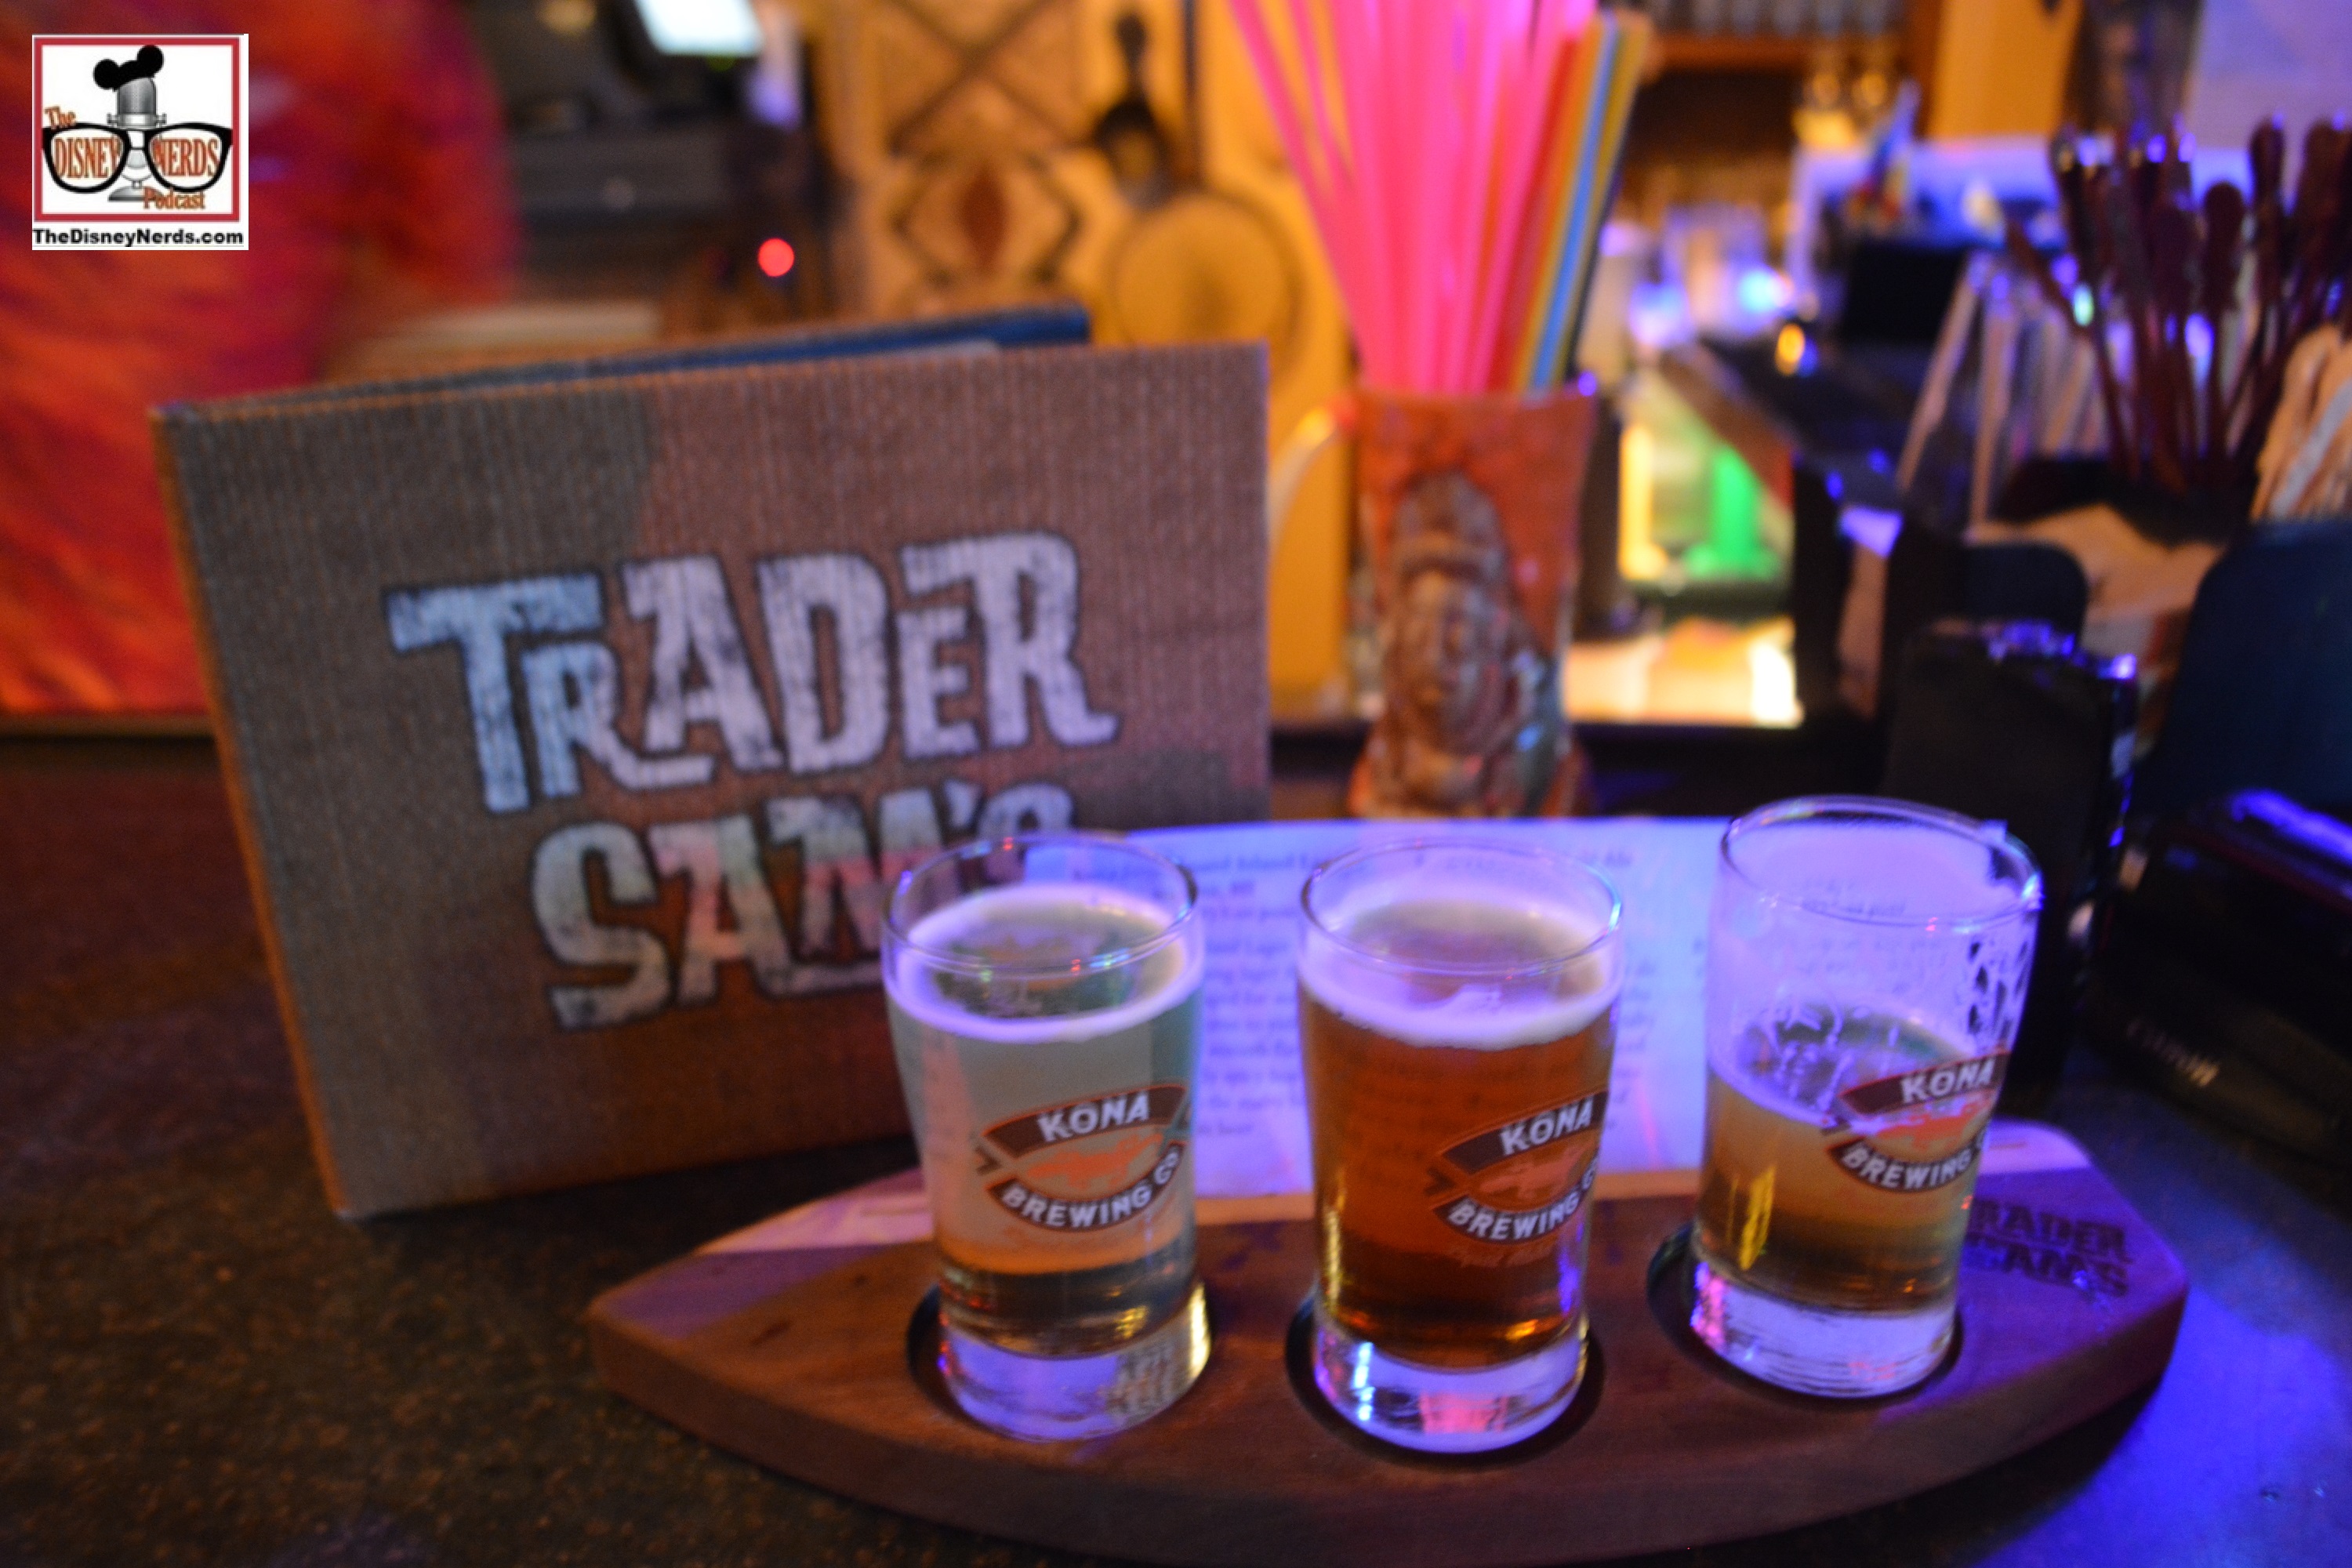 Let's head to Trader Sams for a Kona Beer flight... this will work until food and wine starts.